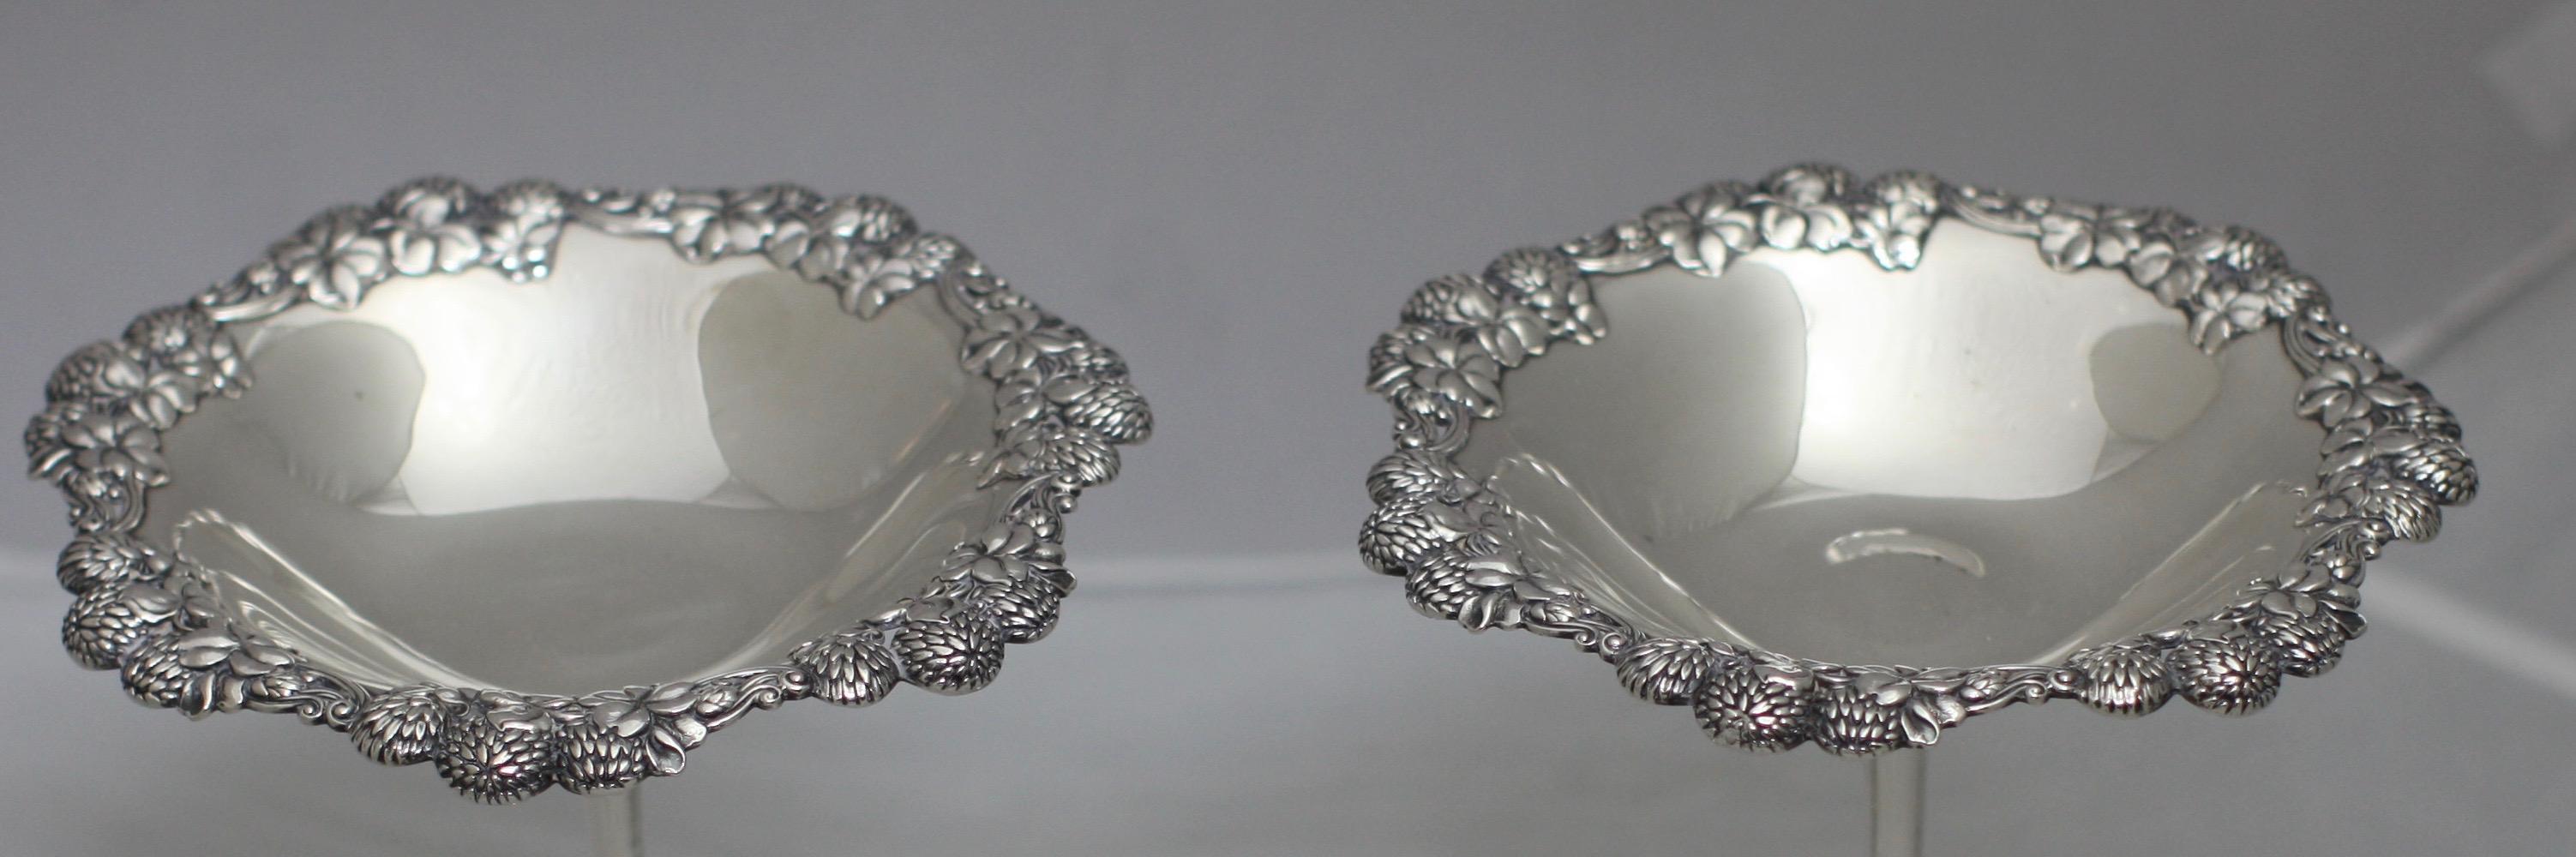 Fine Pair of Tiffany & Co. Sterling Silver Compotes For Sale 2